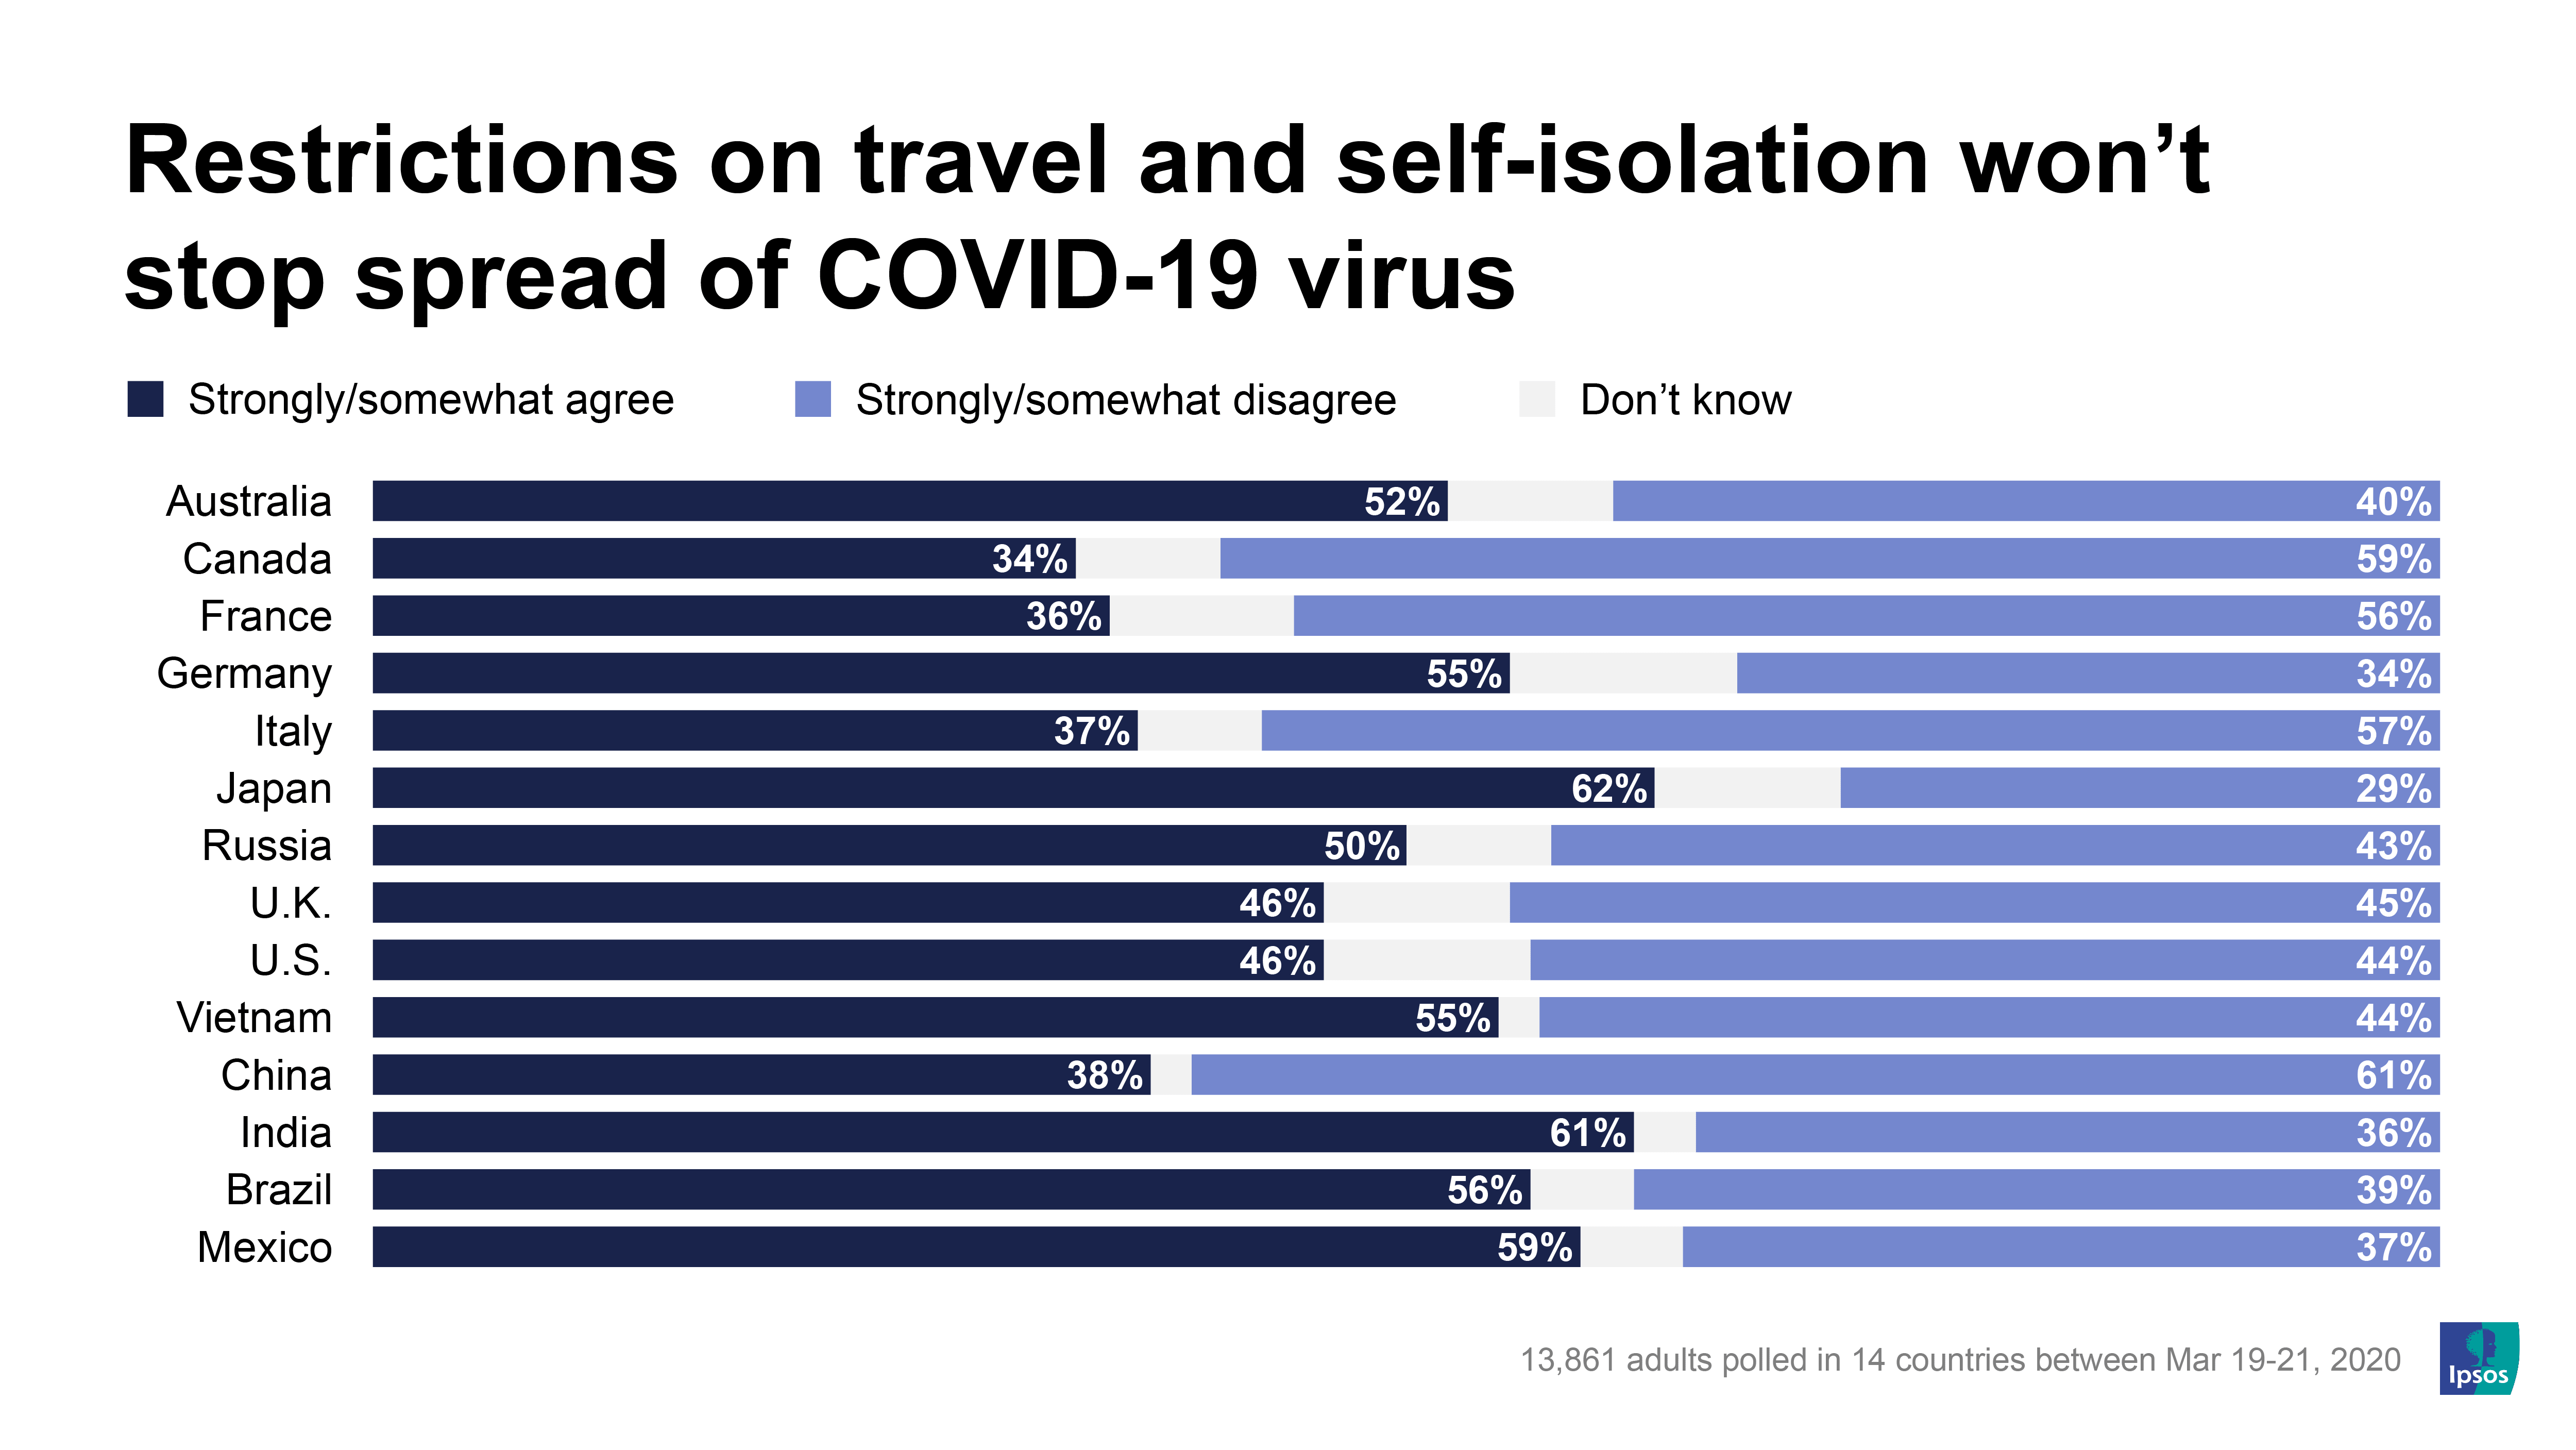 Restrictions on travel and self-isolation won't stop spread of COVID-19 virus | Ipsos